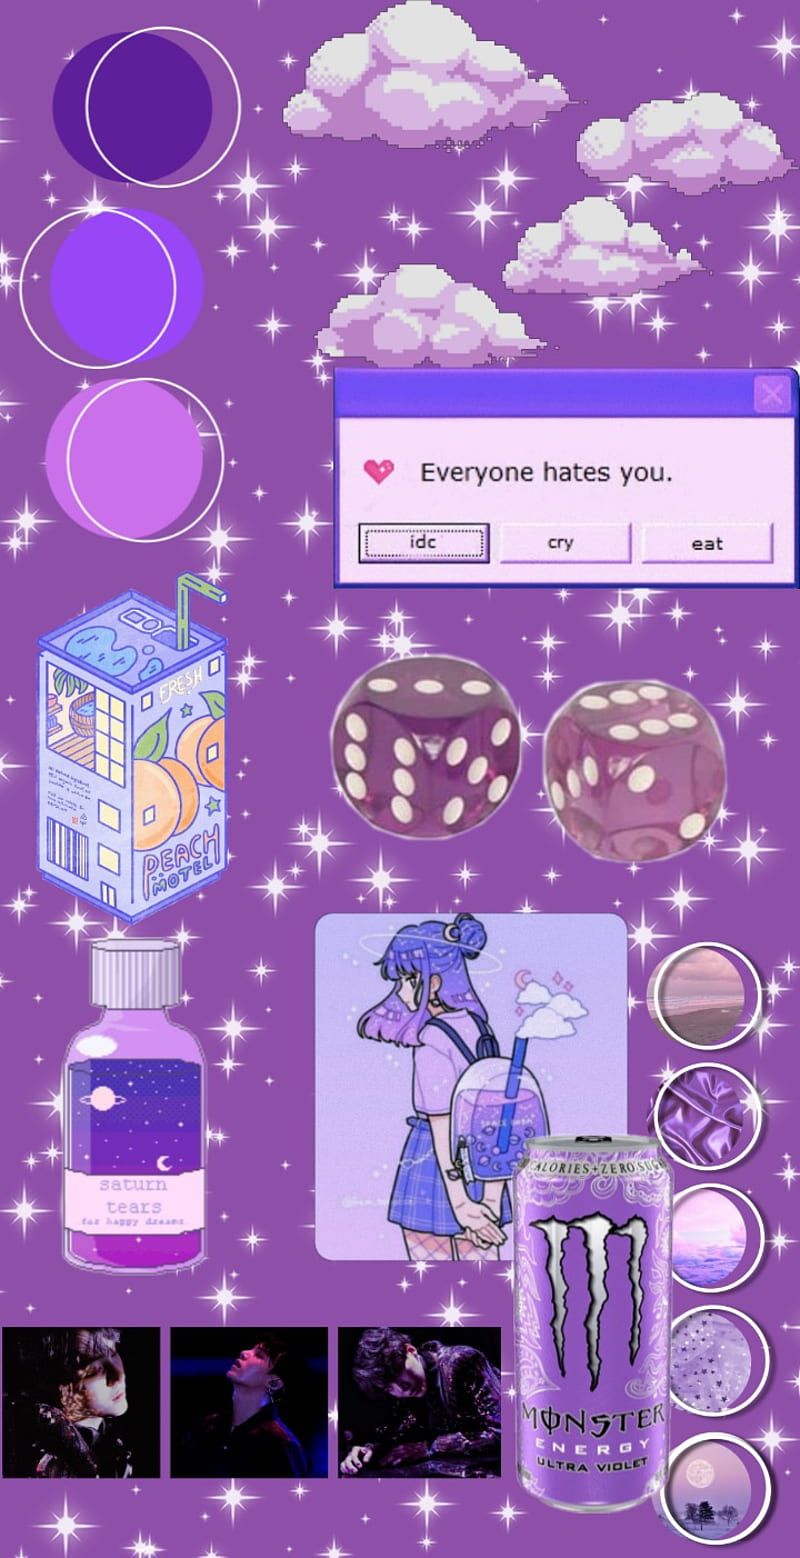 Aesthetic purple background with pictures of a girl, dice, a drink, and a purple and white monster - Cute purple, purple